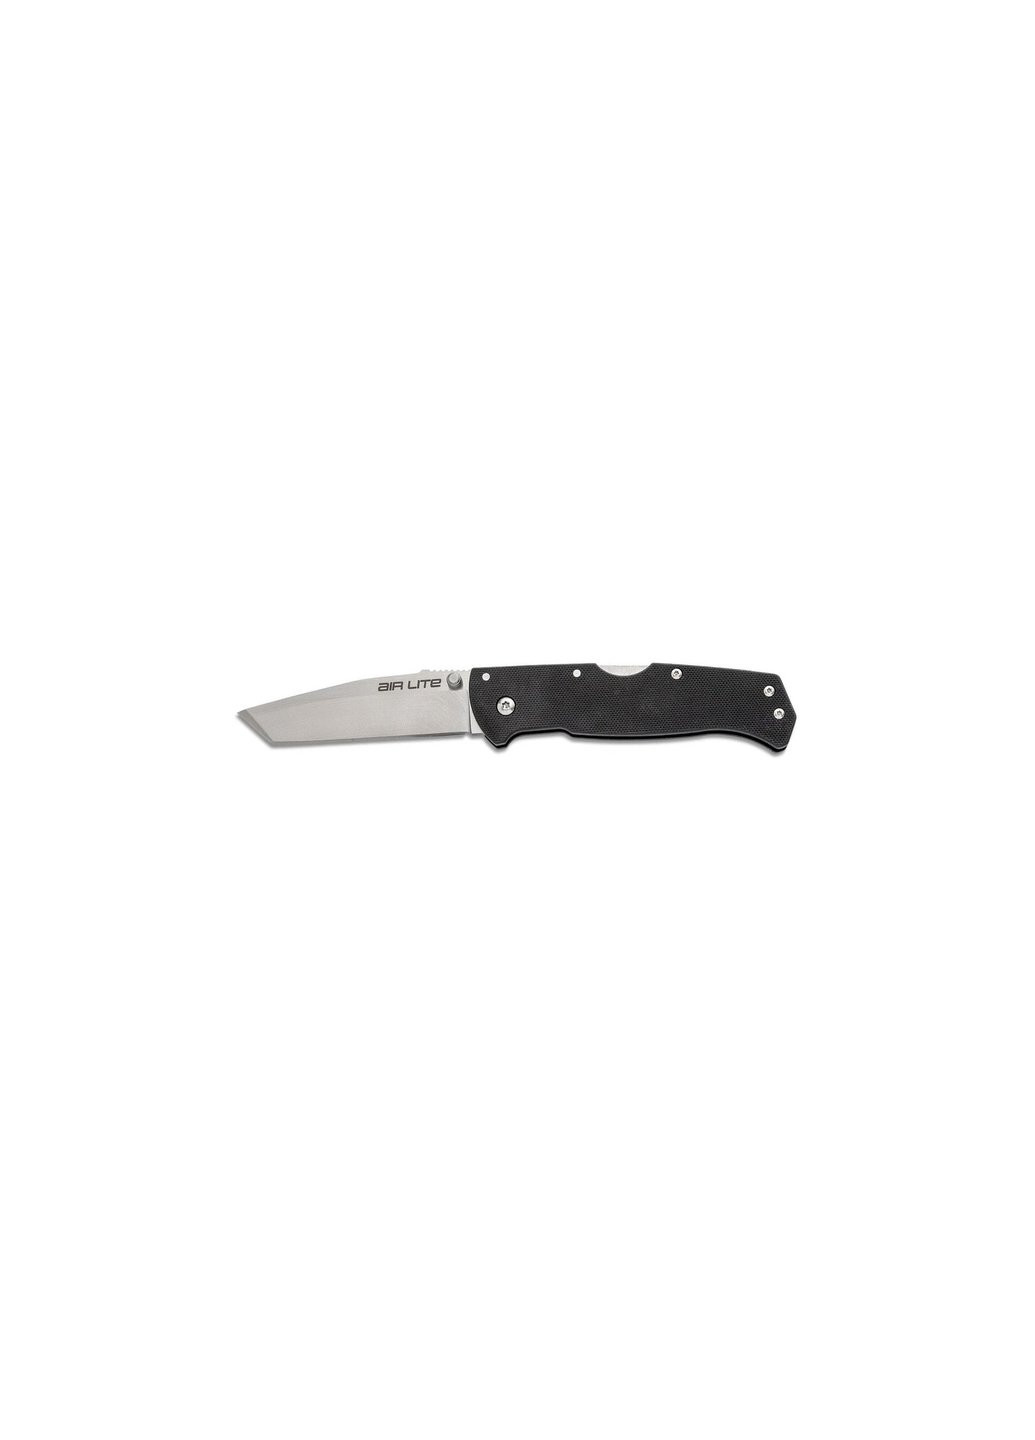 Нож Air Lite Tanto Point (26WT) Cold Steel (257223276)